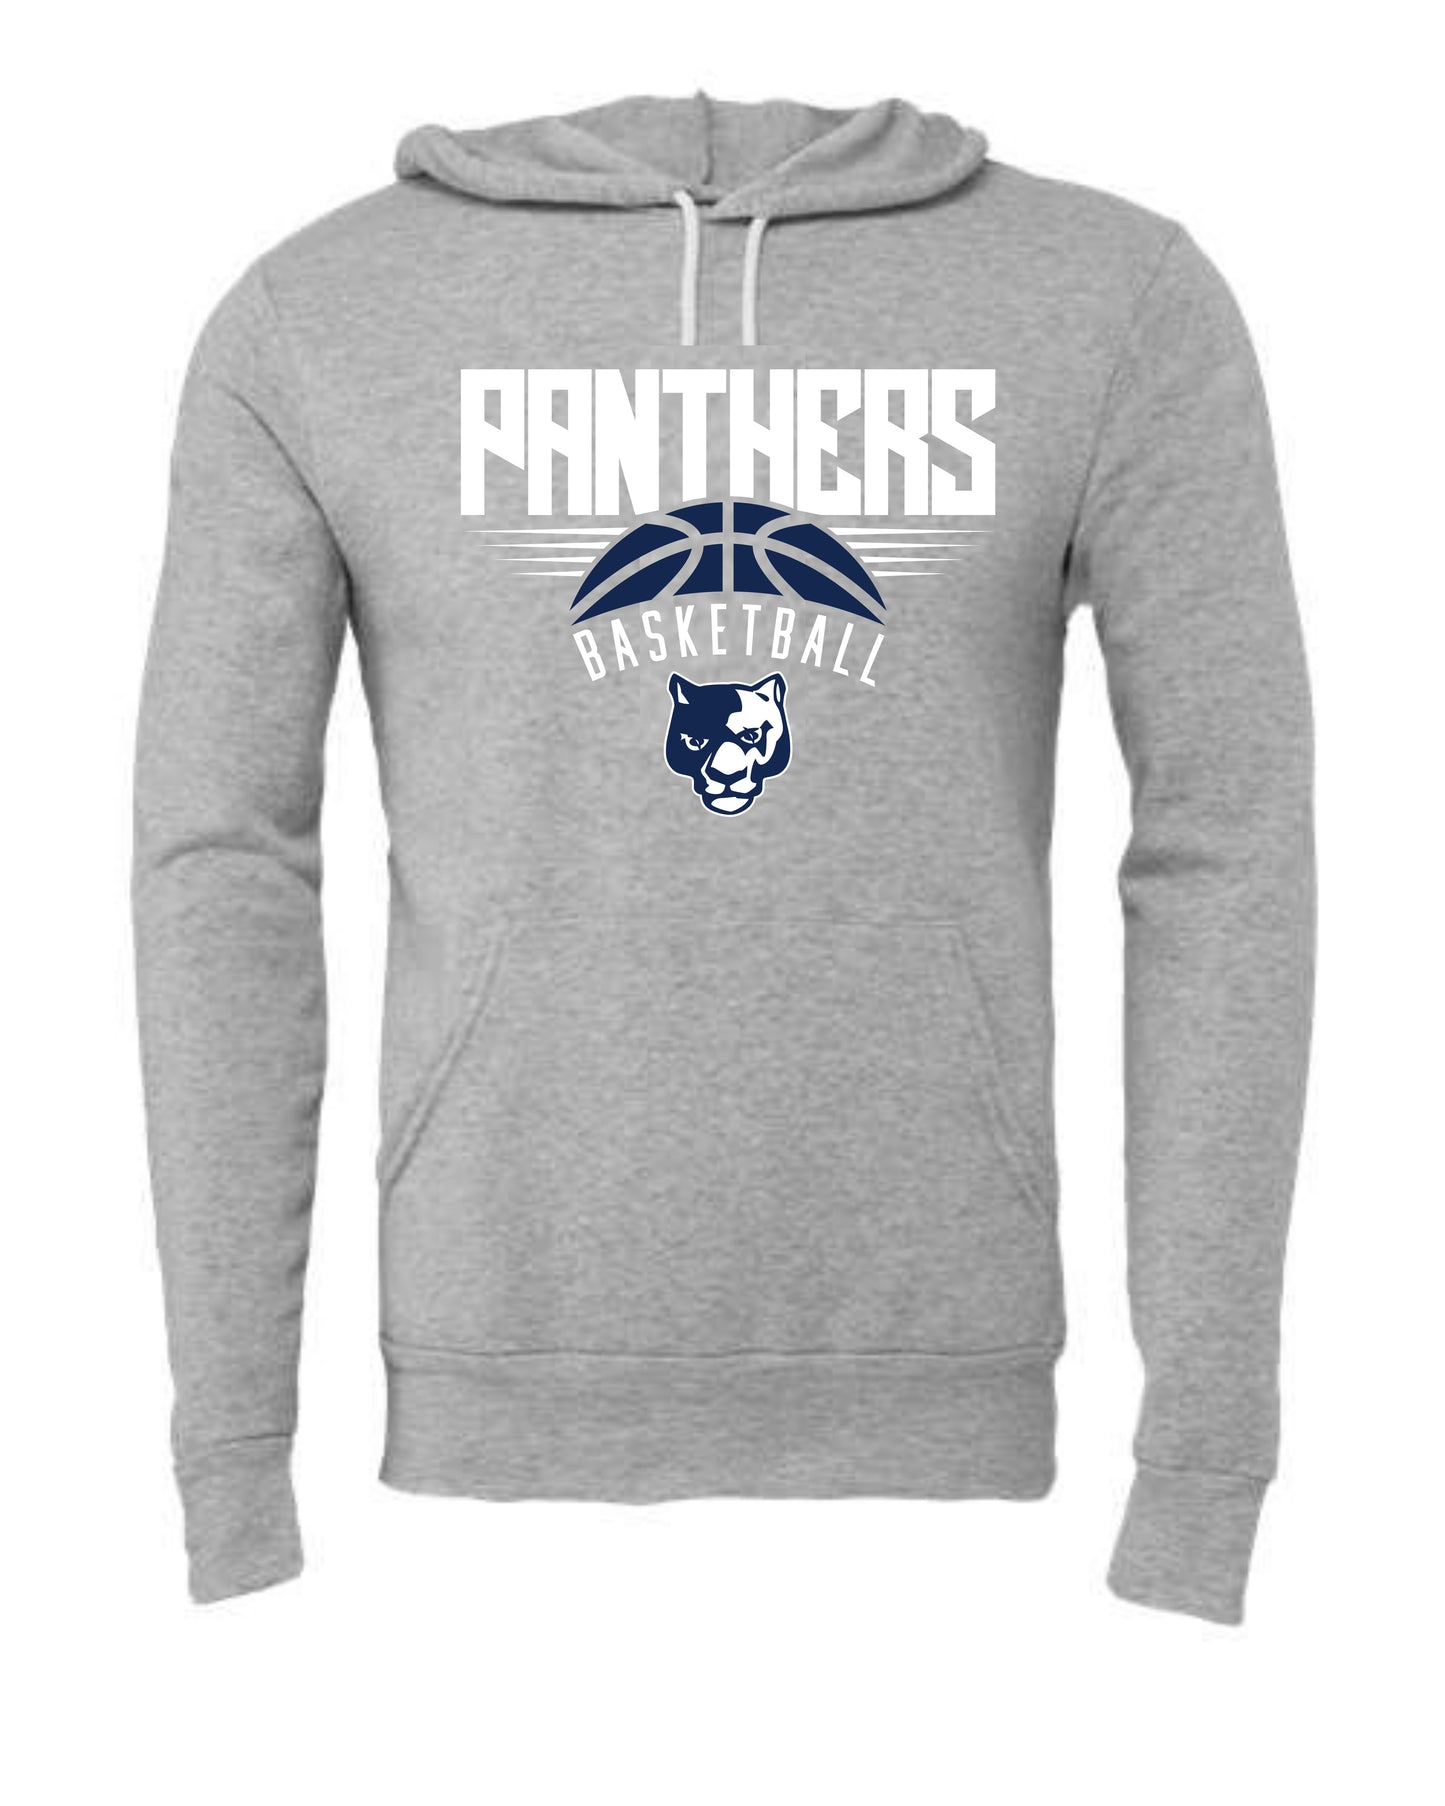 Panthers Basketball - Adult Hoodie